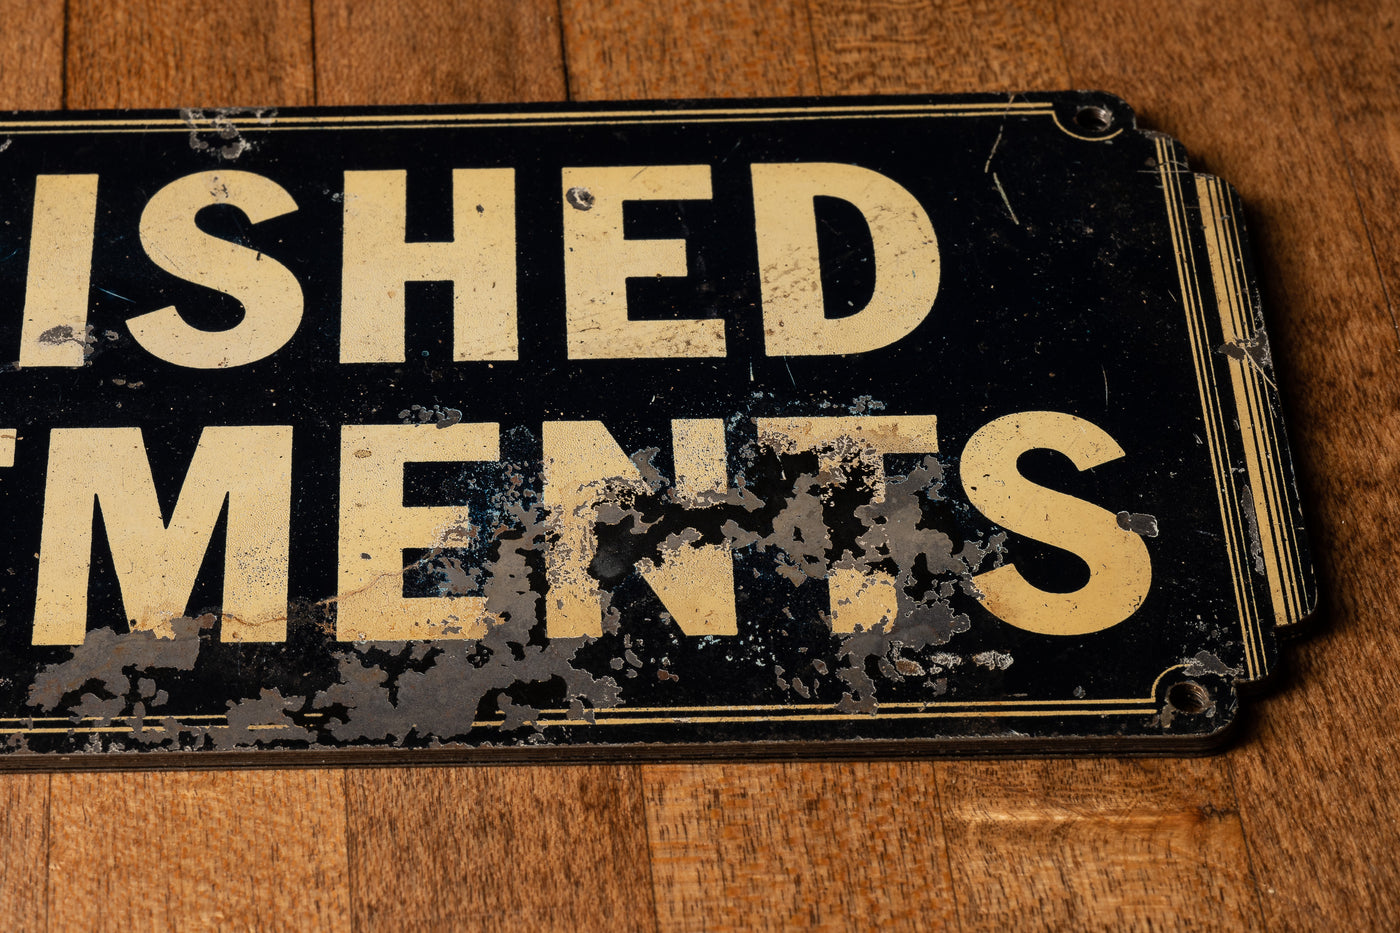 c. 1930s Art Deco Furnished Apartments Sign